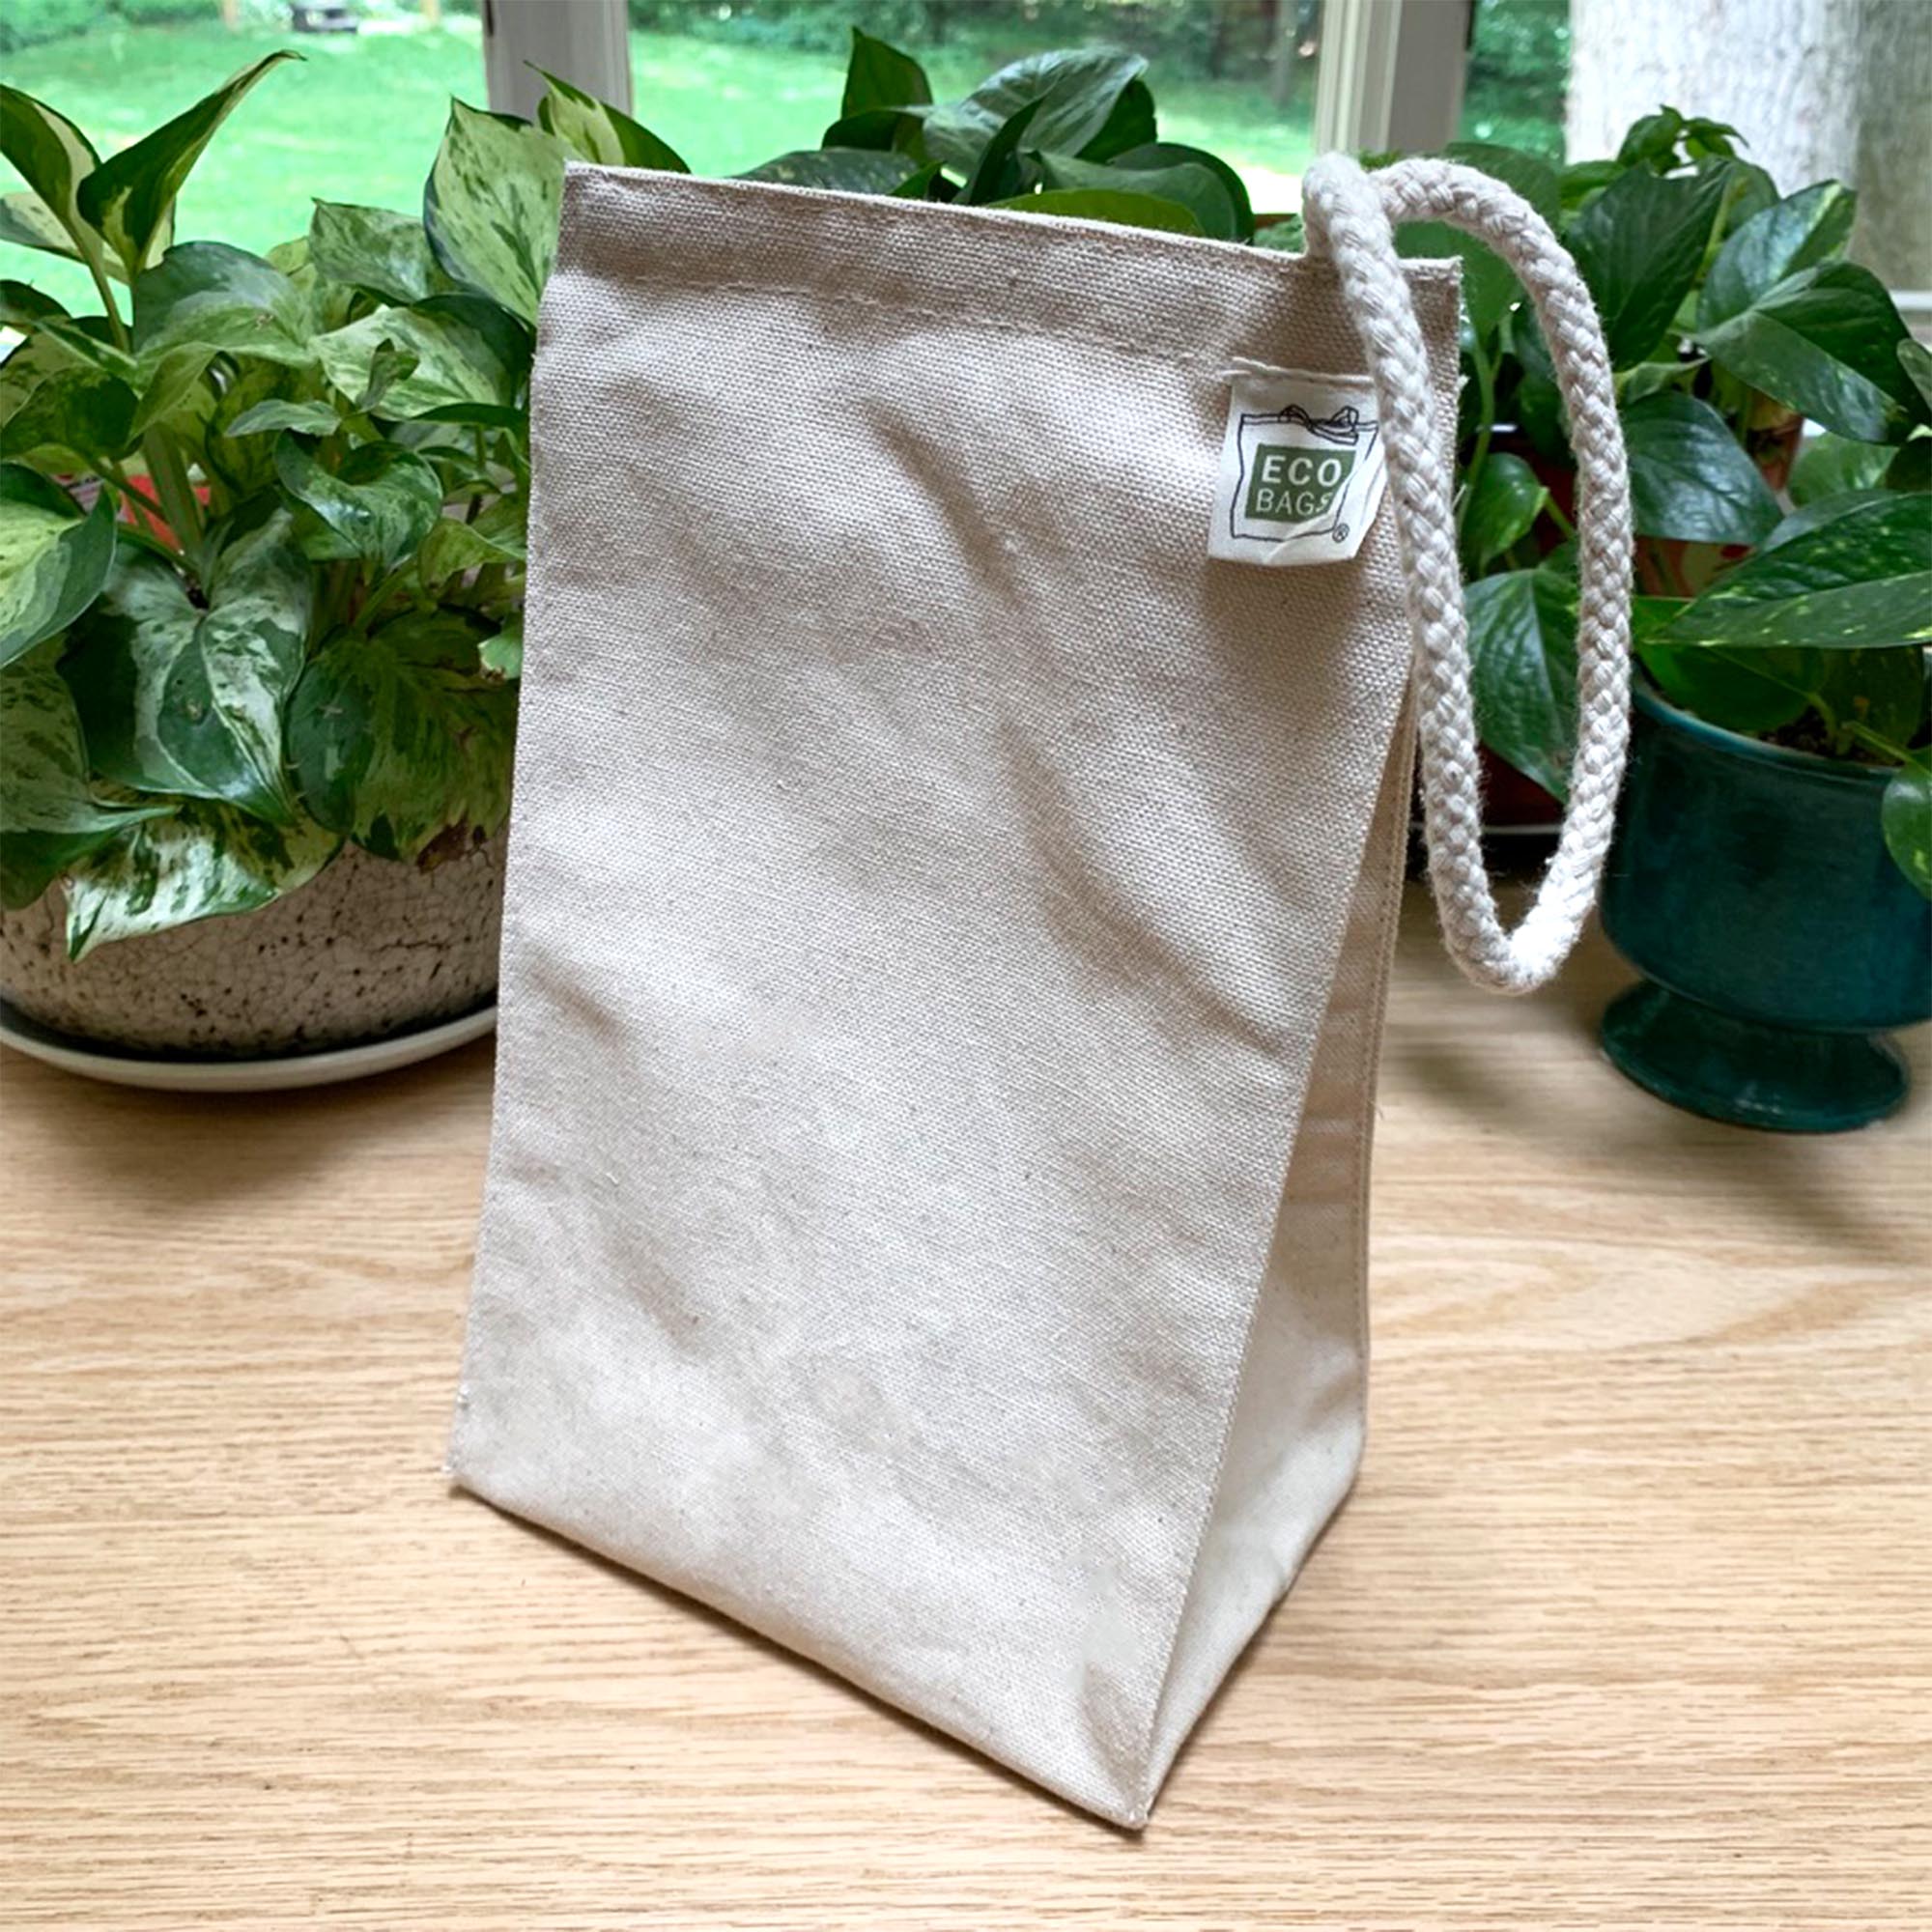 Light beige cotton lunch bag with rope handle, on a table with plants in the background